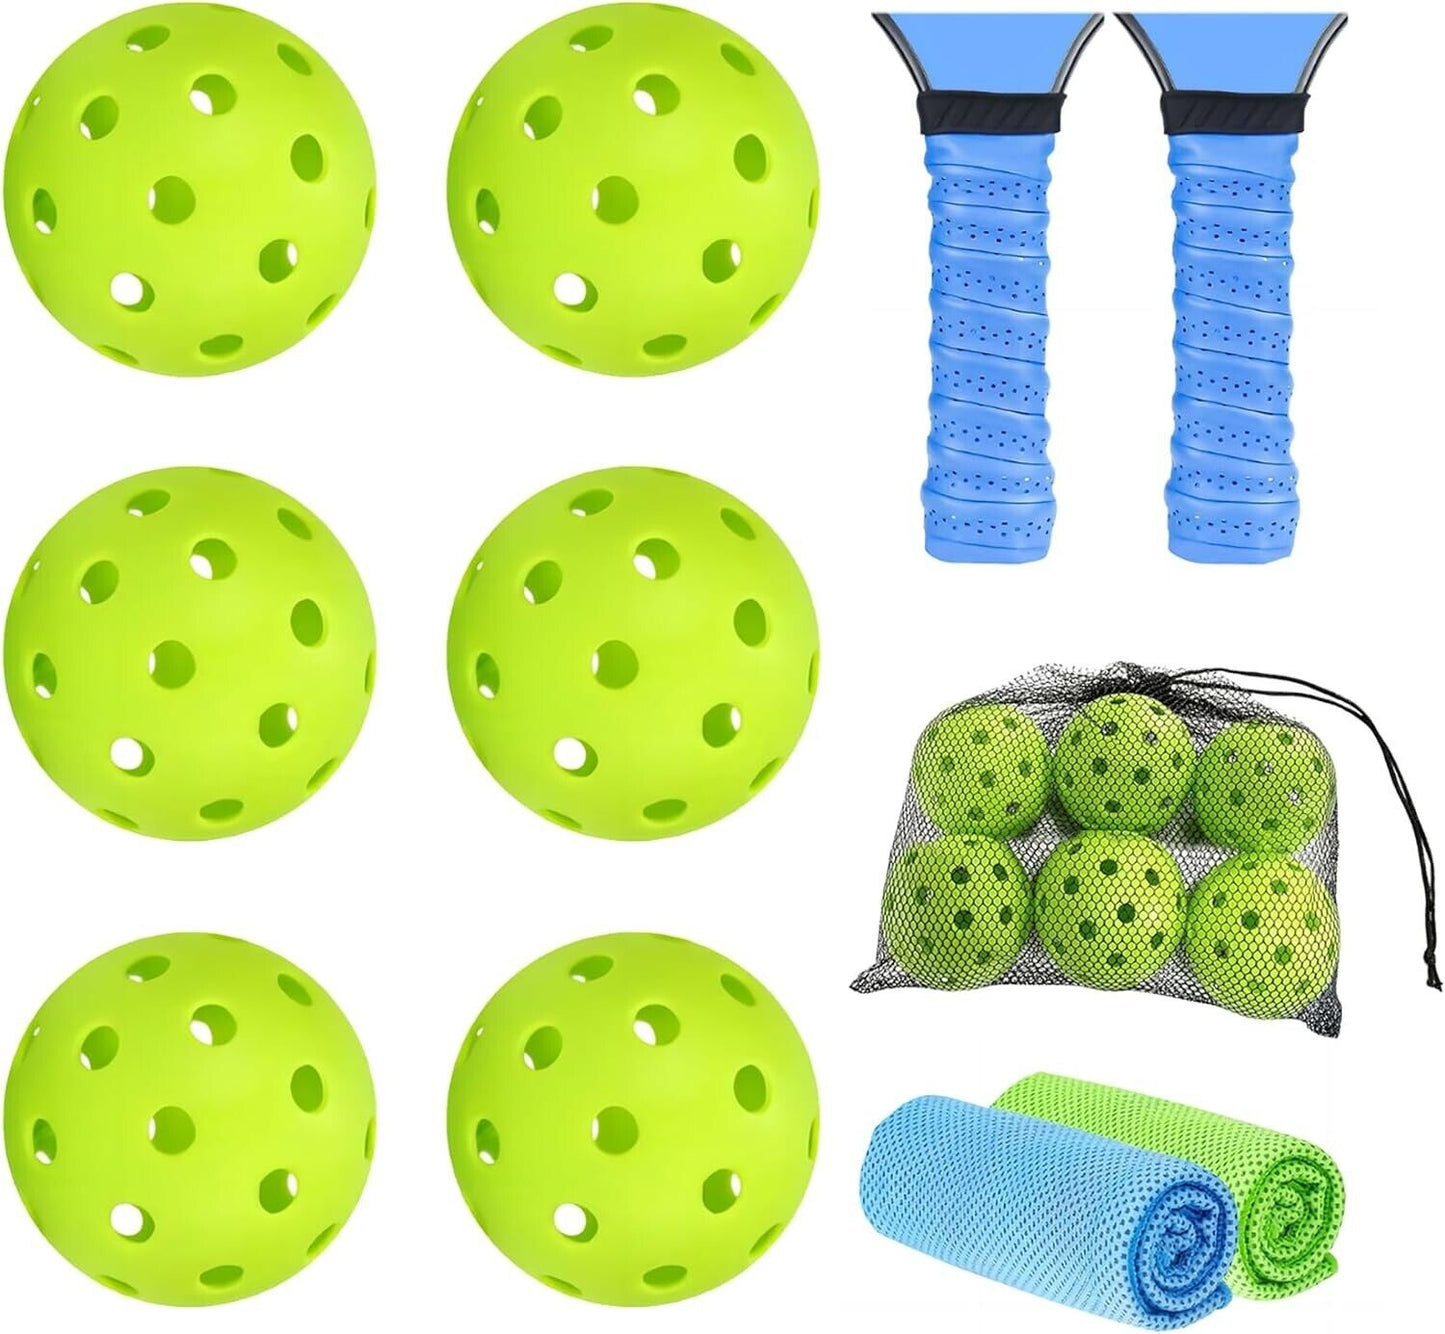 6-Pack Neon Green Pickleball Balls Set with Grip Tape & Cooling Towels